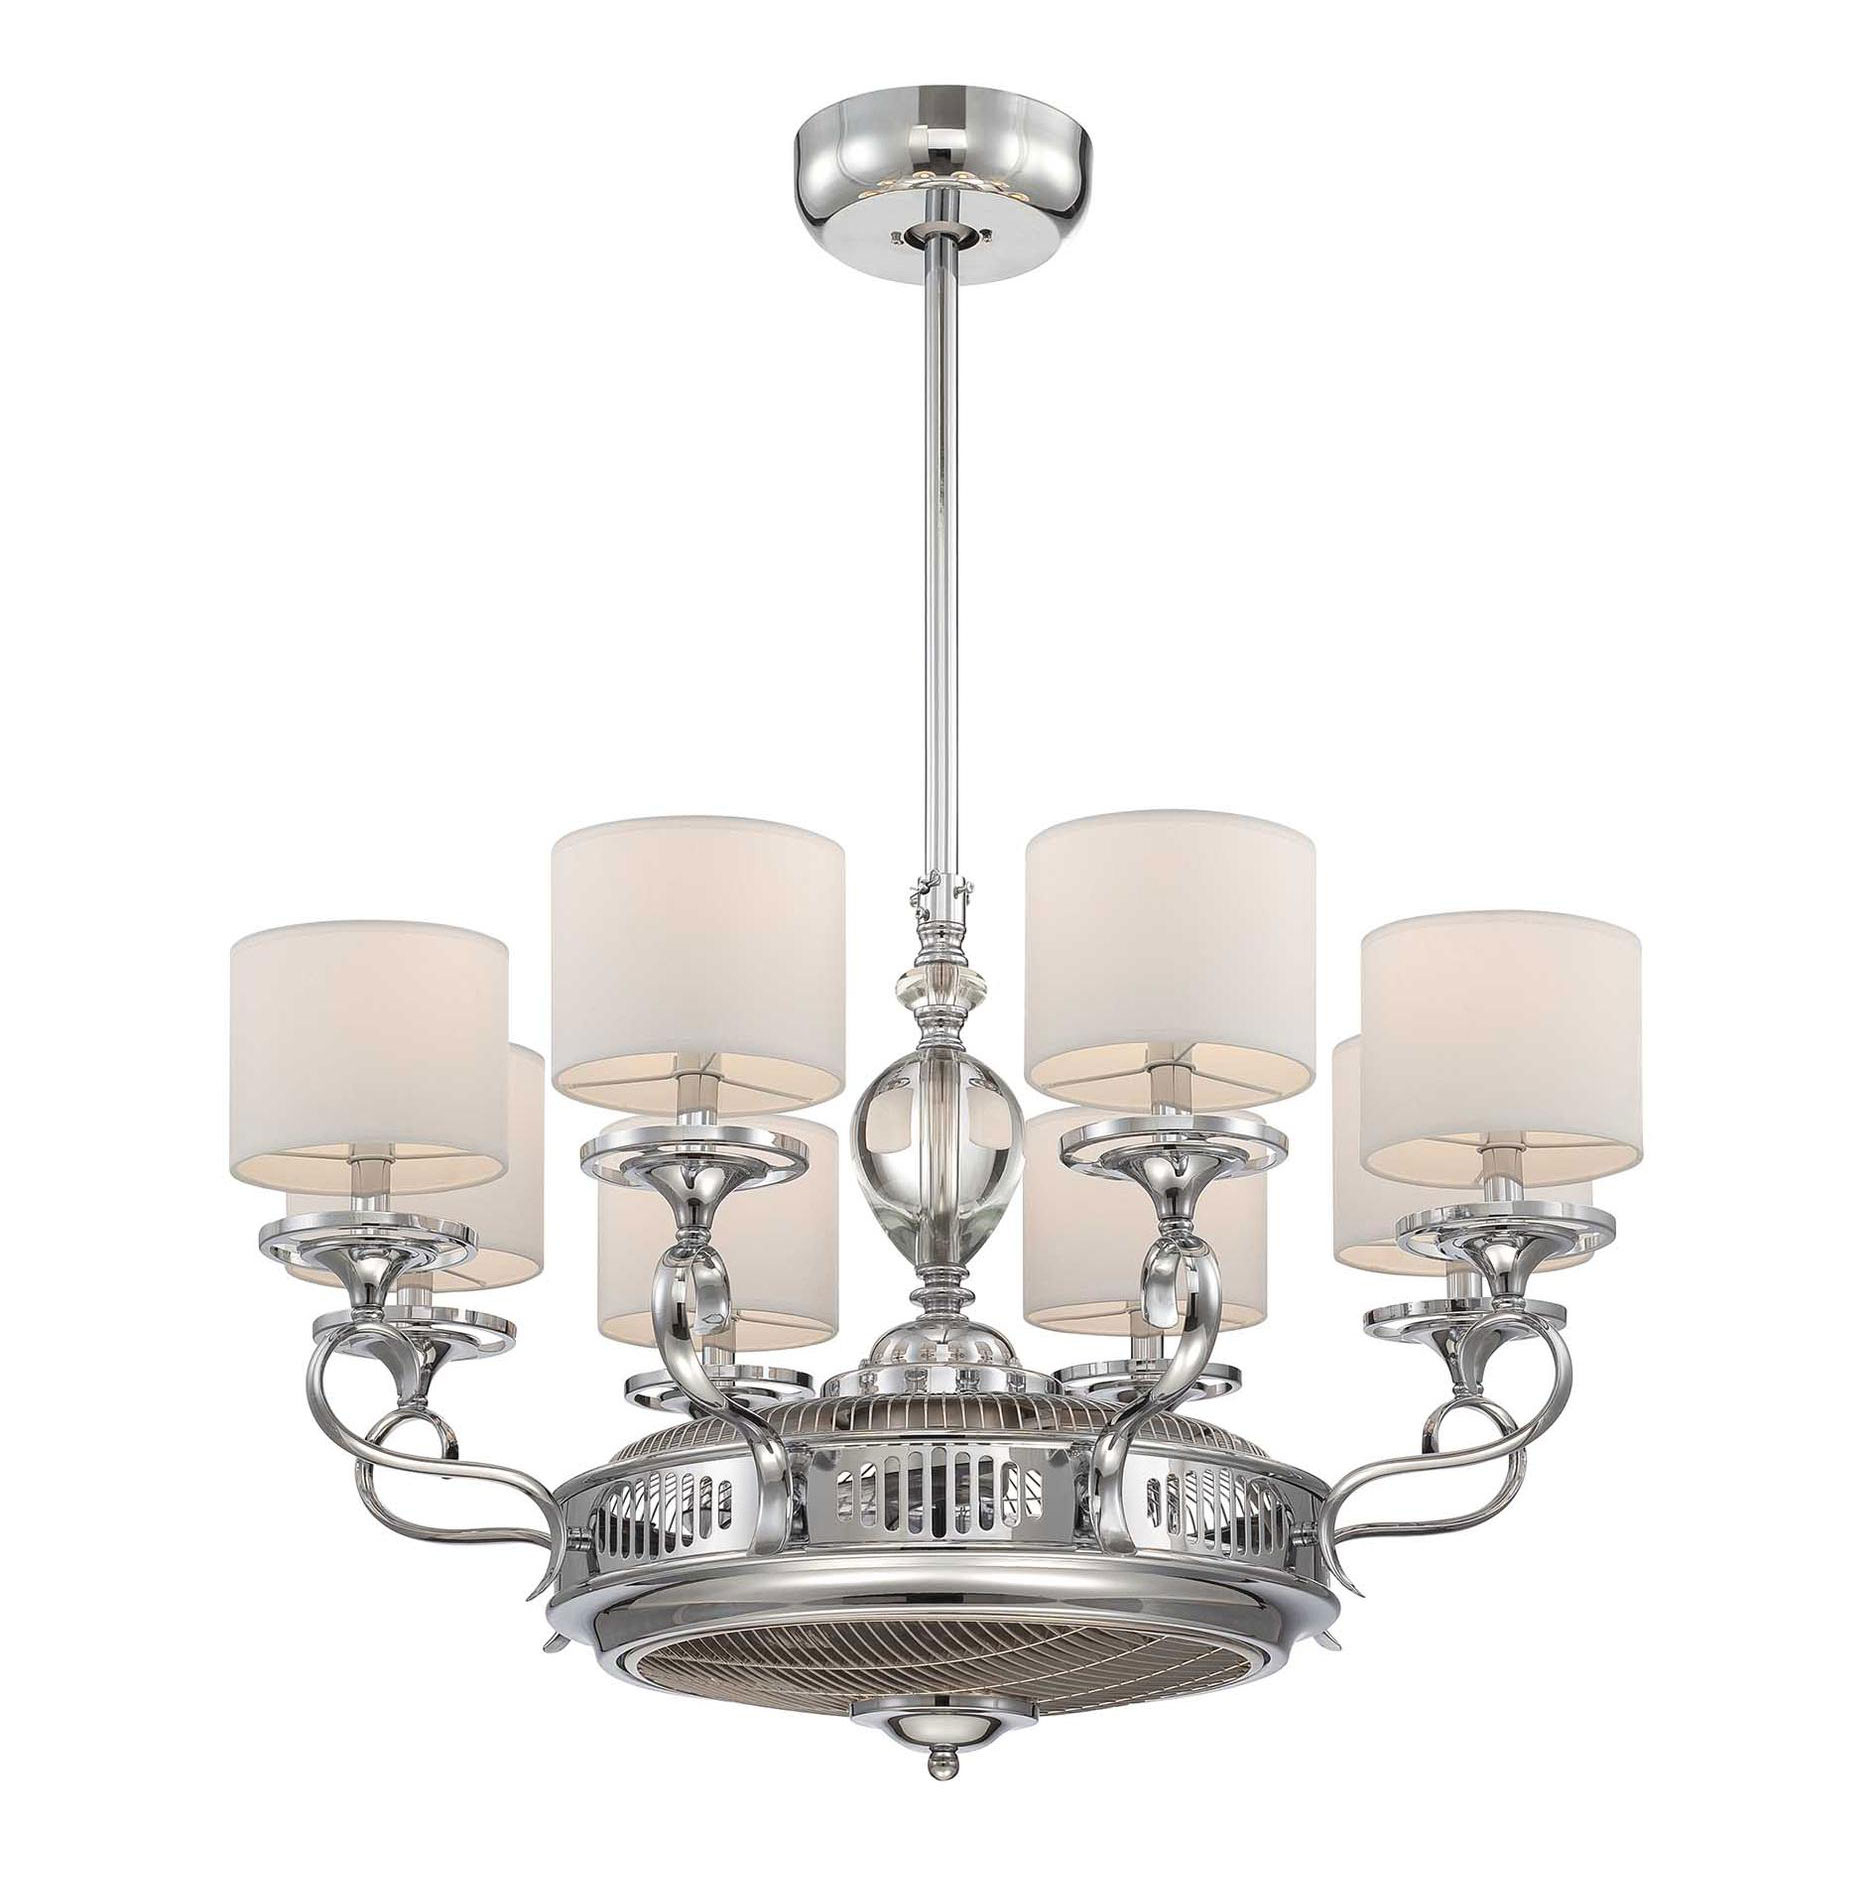 Levantara Chandelier Ceiling Fan With Light Savoy House 34 327 pertaining to size 1875 X 1888